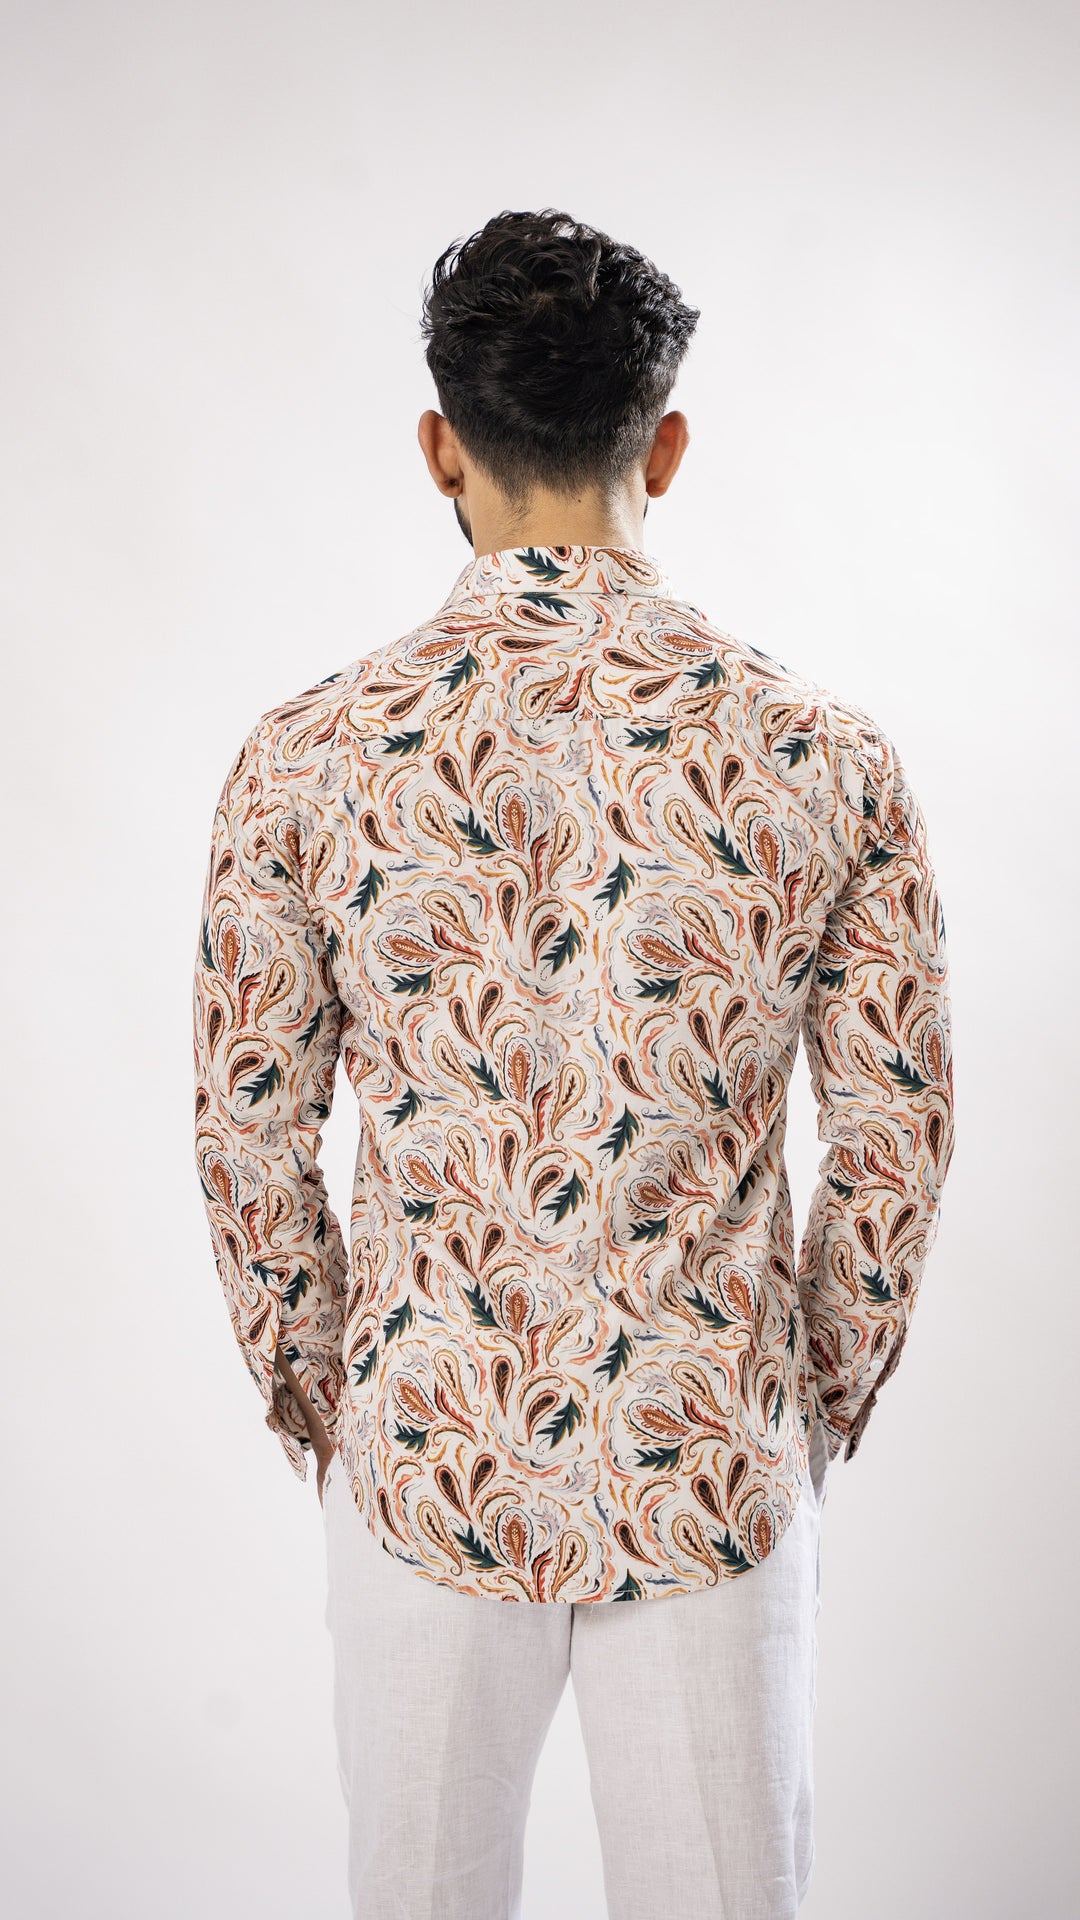 ABSTRACT PAISELY  PRINT SUPER SOFT PREMIUM COTTON SHIRT - Royaltail